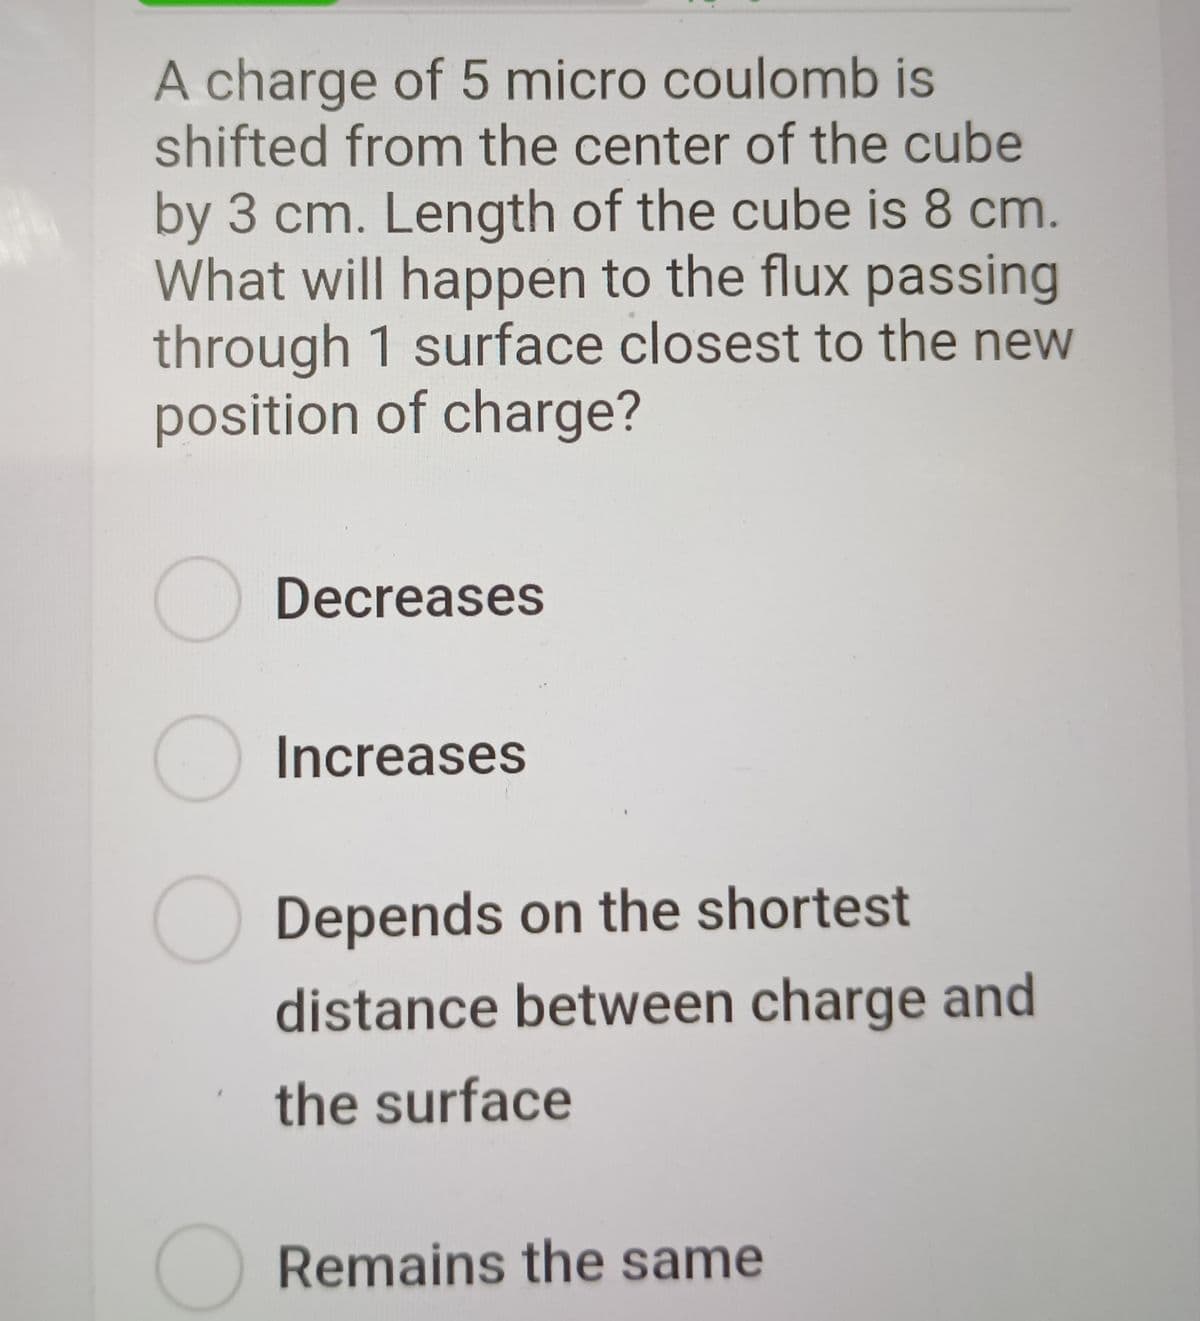 A charge of 5 micro coulomb is
shifted from the center of the cube
by 3 cm. Length of the cube is 8 cm.
What will happen to the flux passing
through 1 surface closest to the new
position of charge?
Decreases
Increases
Depends on the shortest
distance between charge and
the surface
Remains the same
